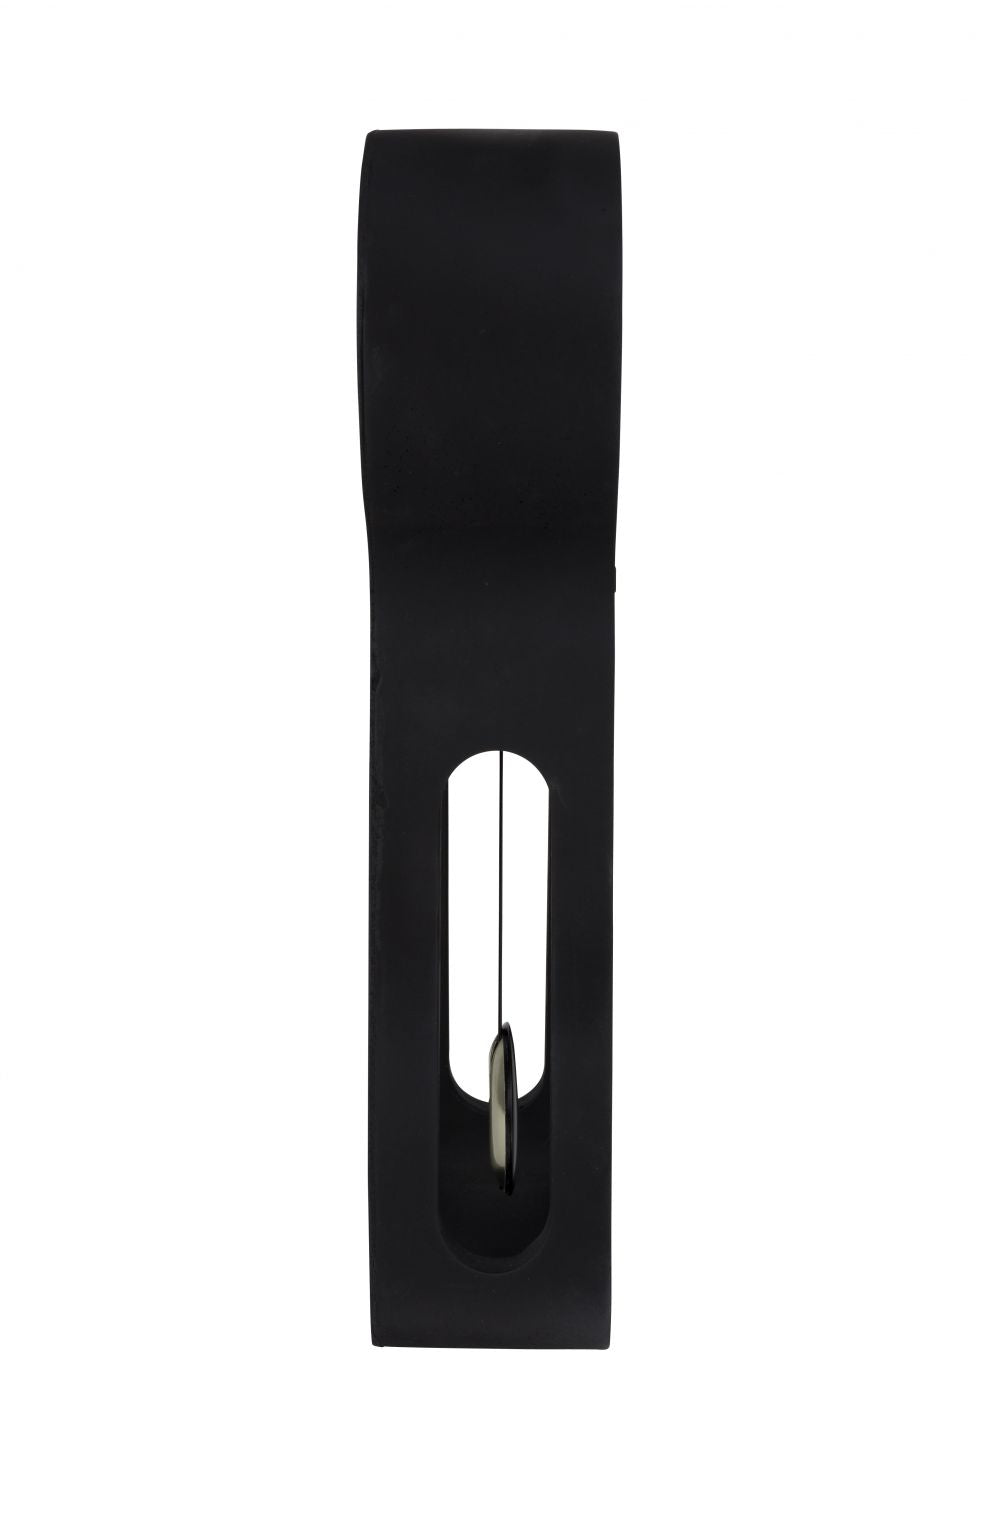 PACK SIZE ISSUE - DO NOT LIST - Zuiver Pendulum Clock Time All Black